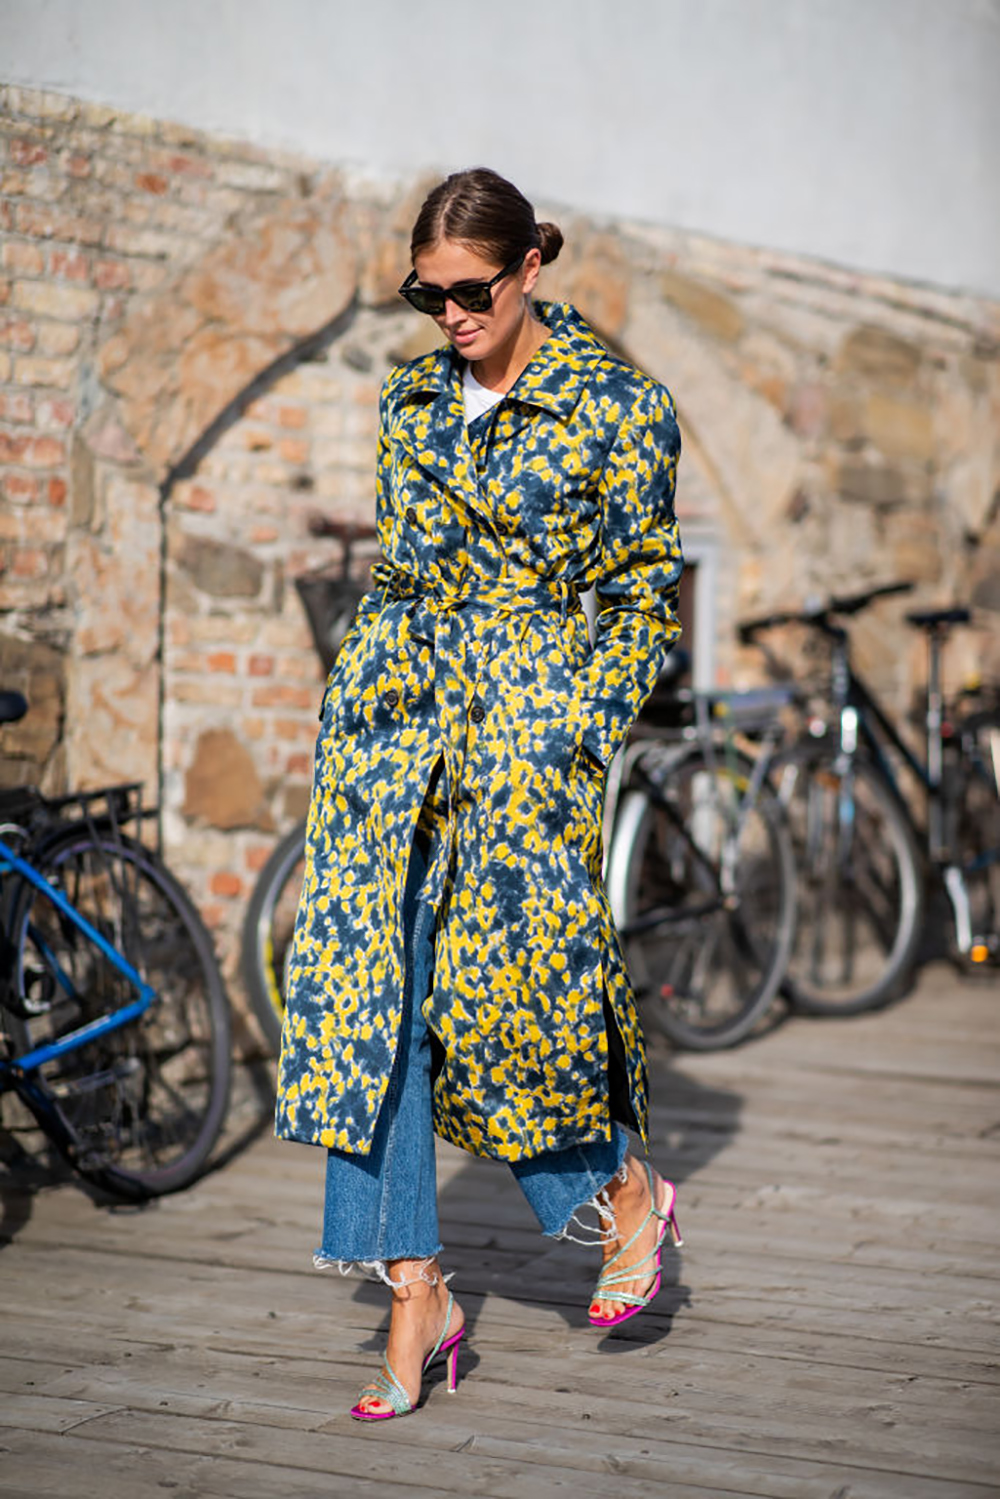 OSLO, NORWAY - AUGUST 14: Darja Barannik wearing coat with floral print is seen outside byTiMo during Oslo Runway SS19 on August 14, 2018 in Oslo, Norway. (Photo by Christian Vierig/Getty Images)